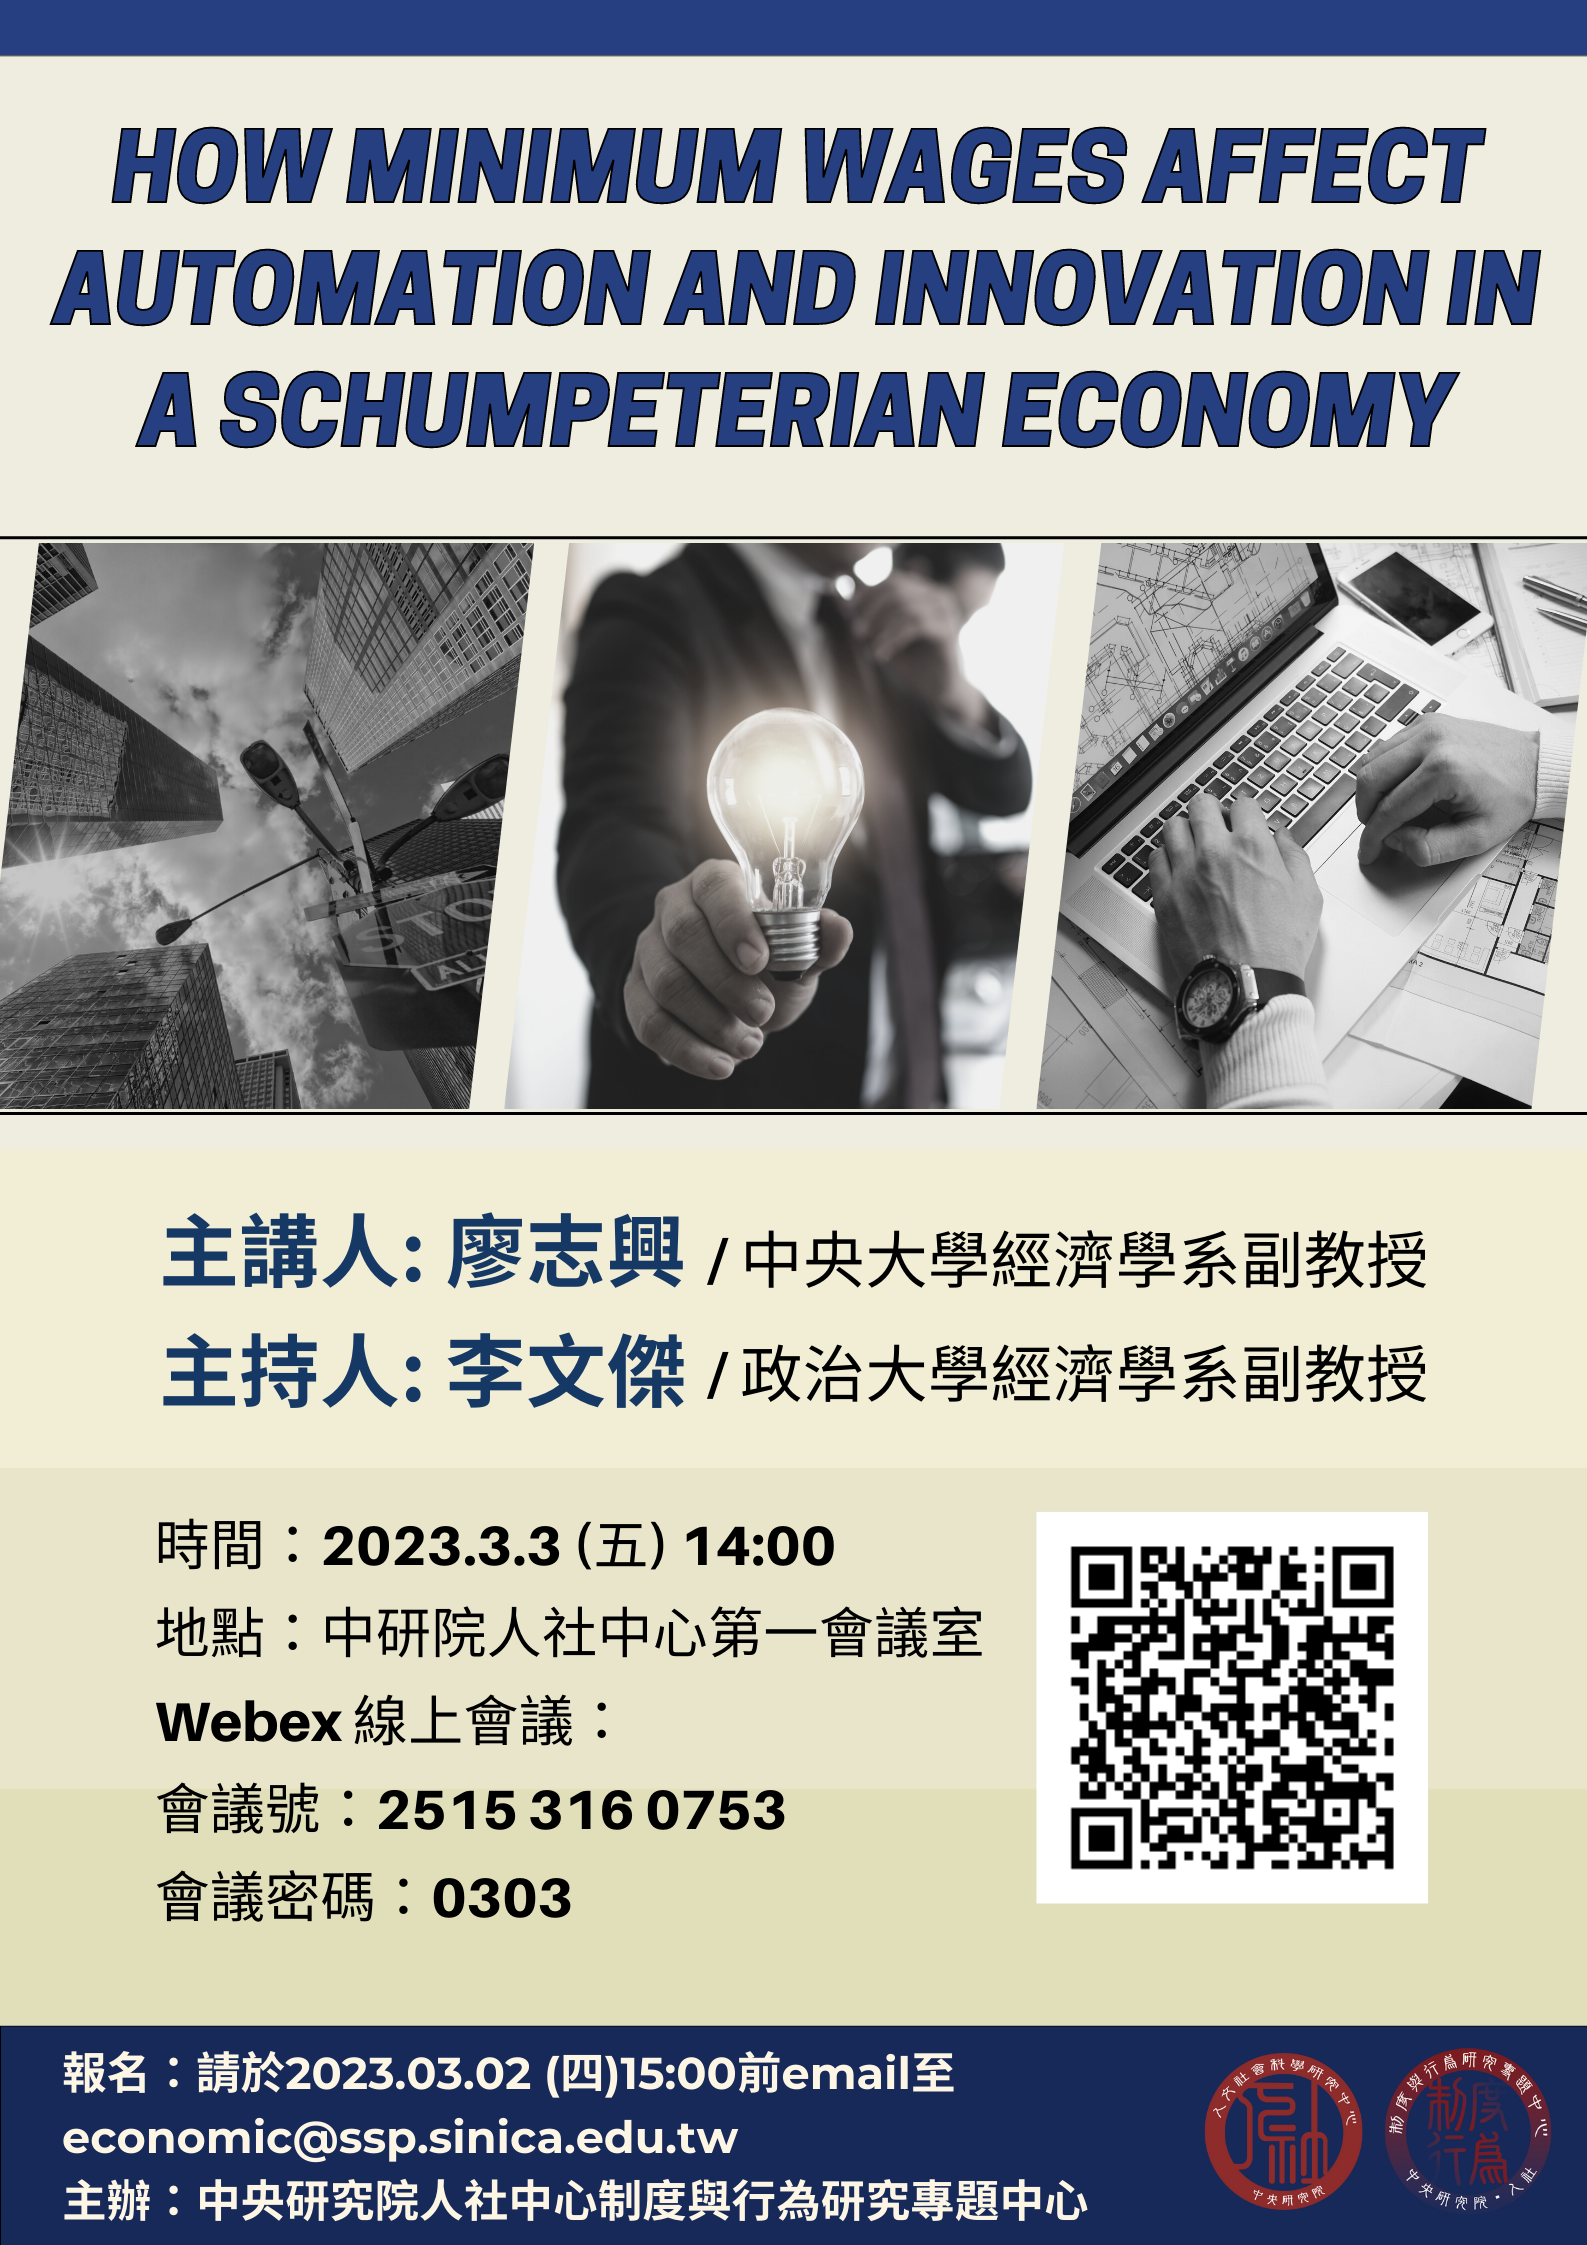 How Minimum Wages Affect Automation and Innovation in a Schumpeterian Economy